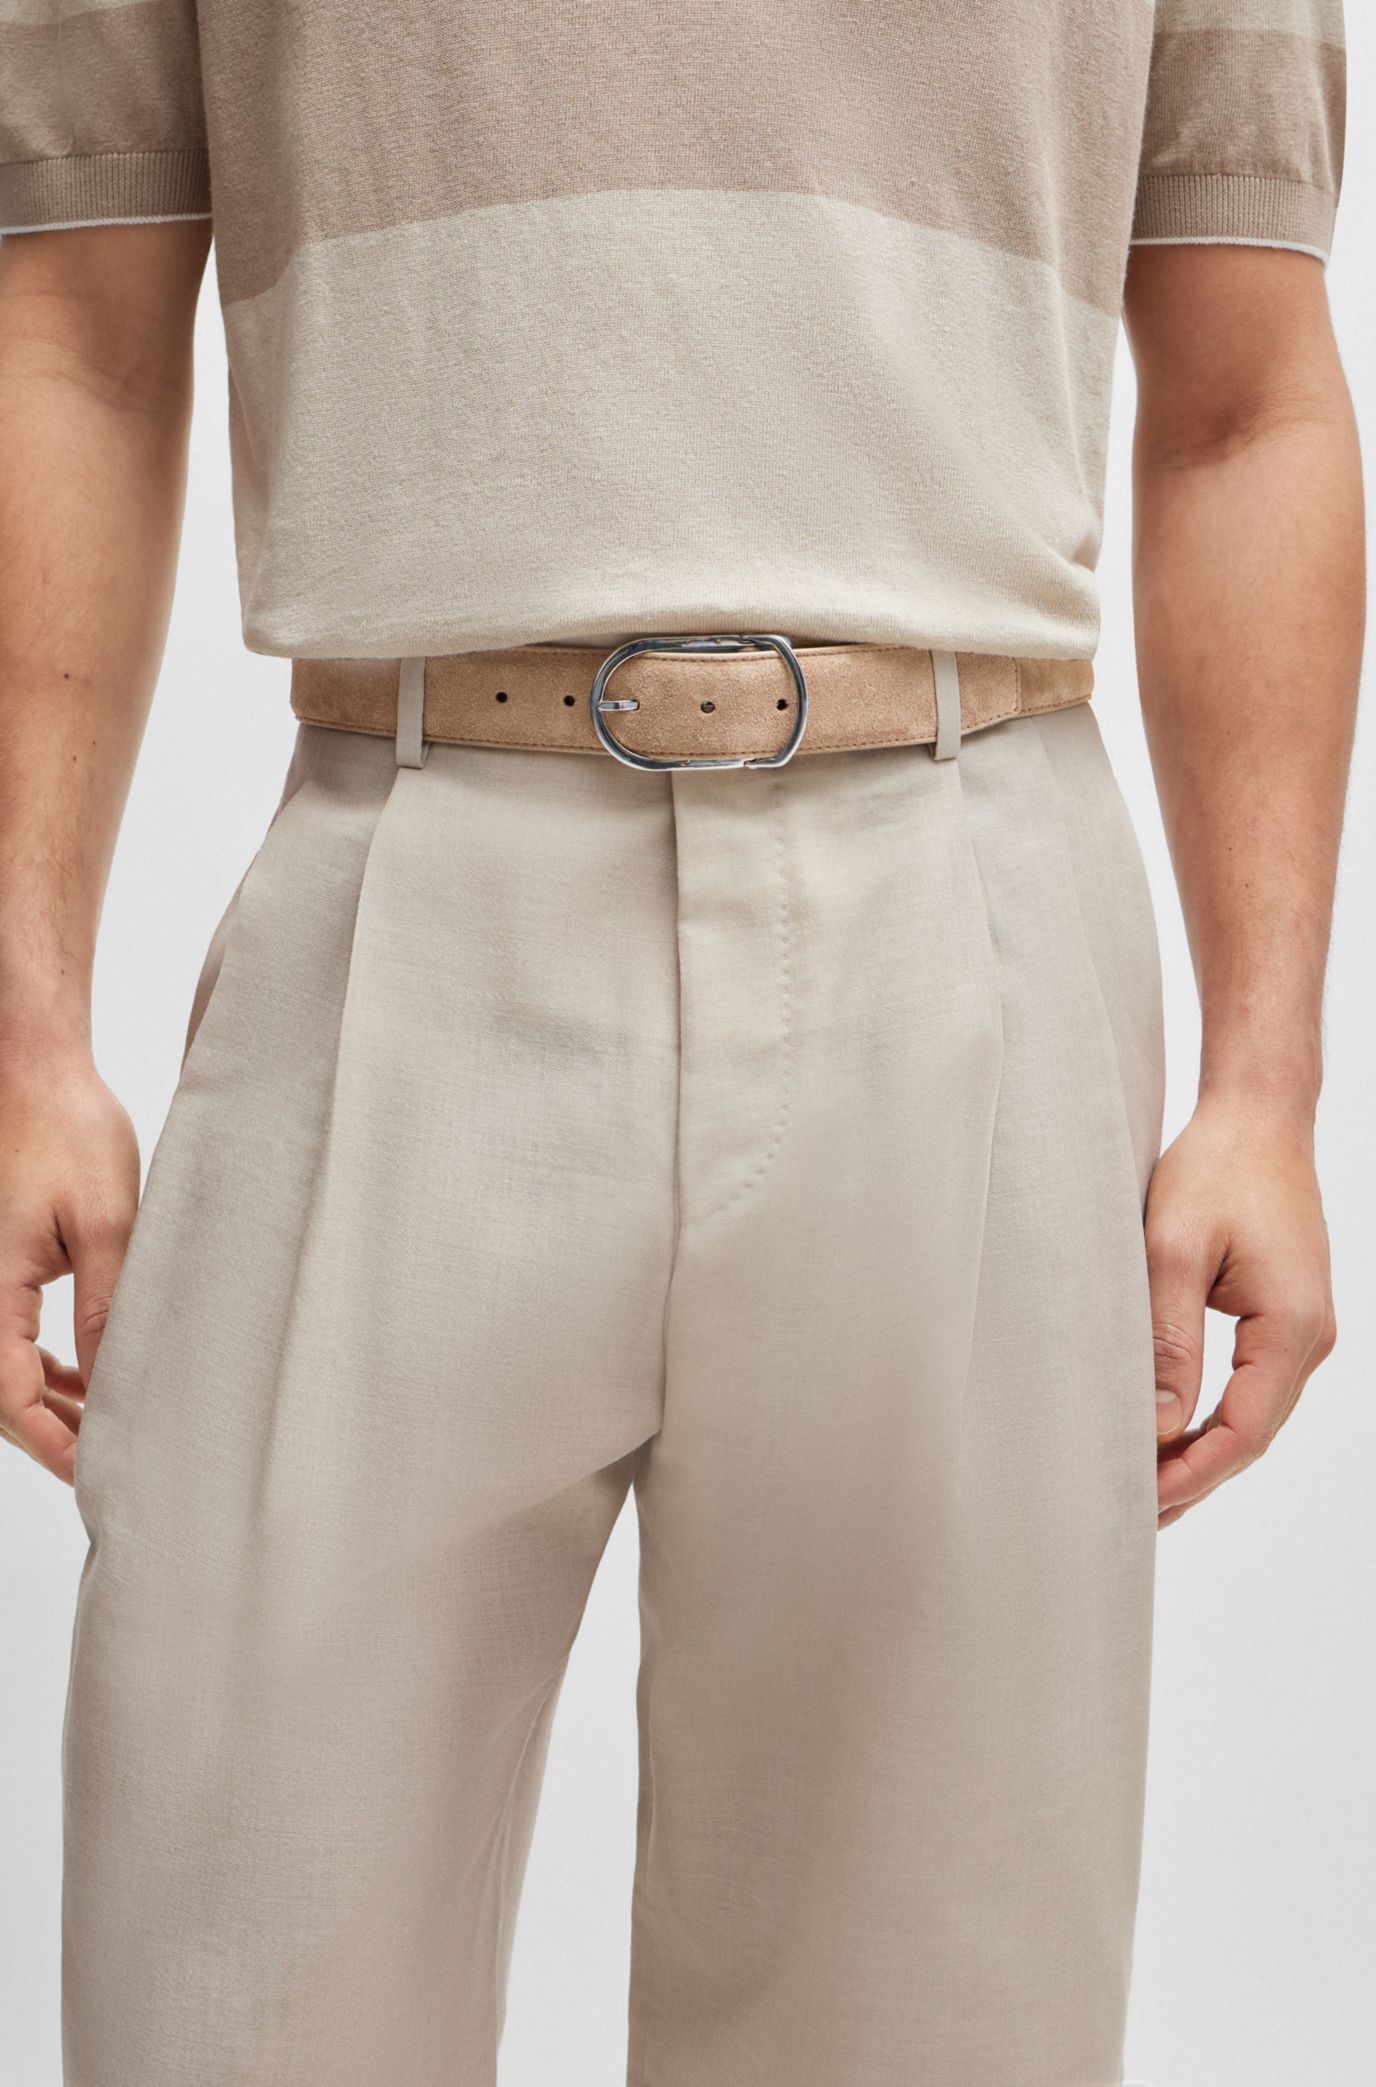 BOSS - Suede belt with hardware keeper in gift box